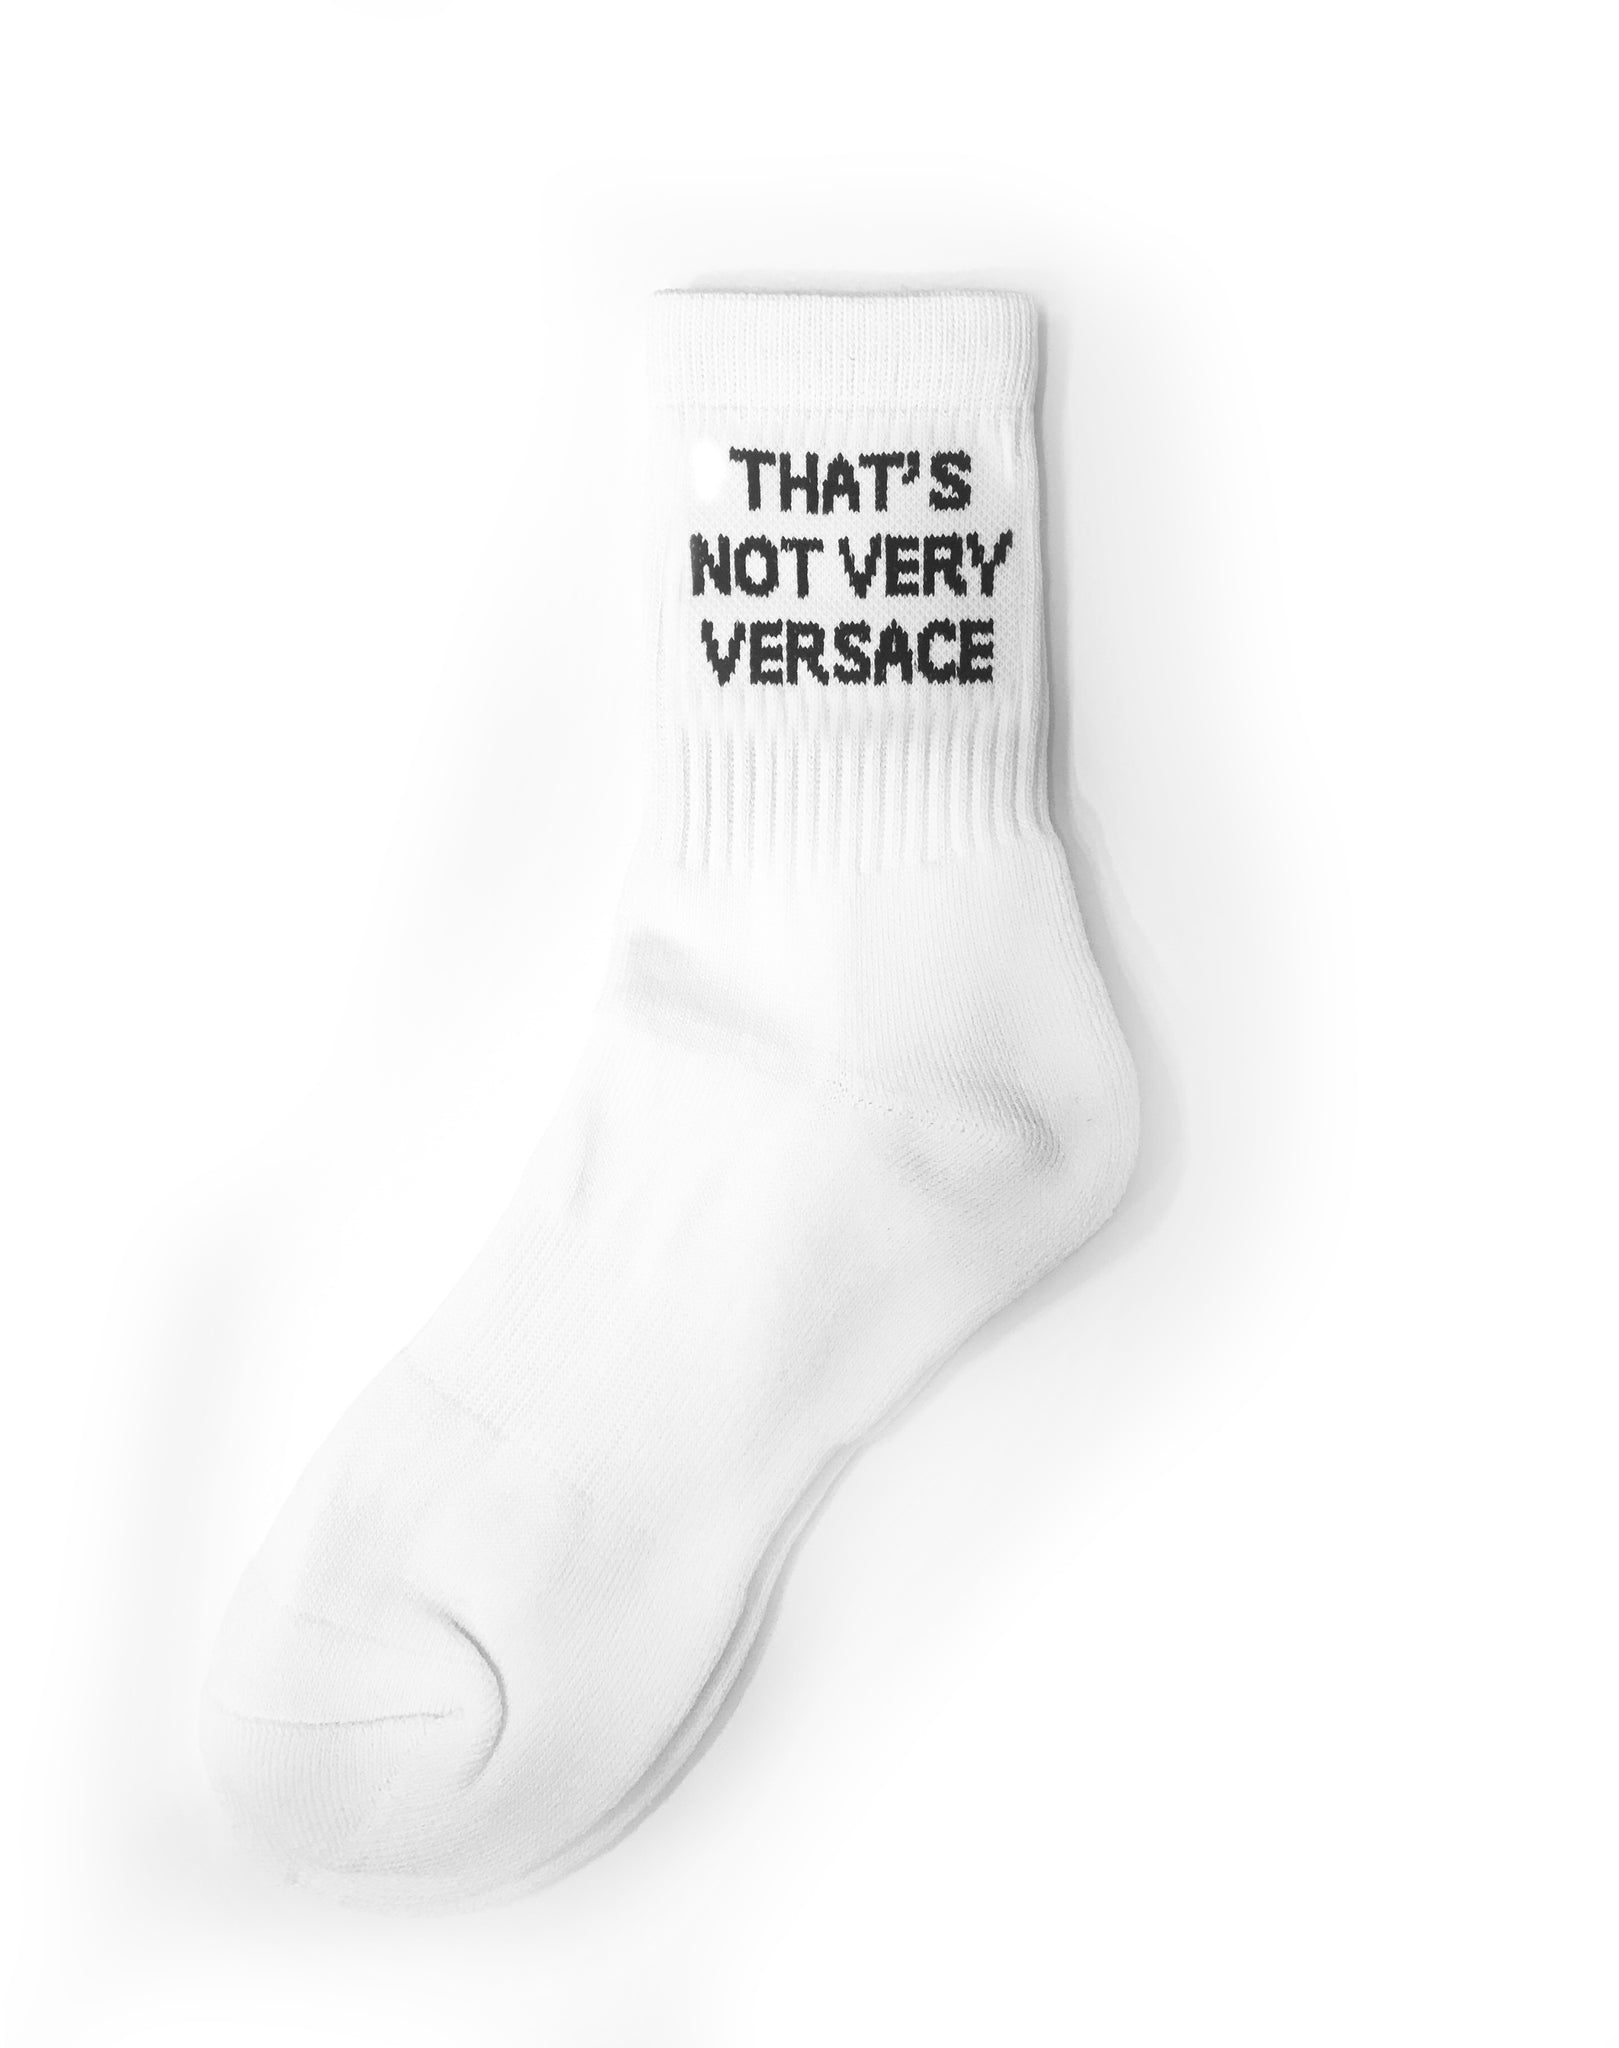 PAUSE 'That's Not Very Versace' Socks – PAUSE Online